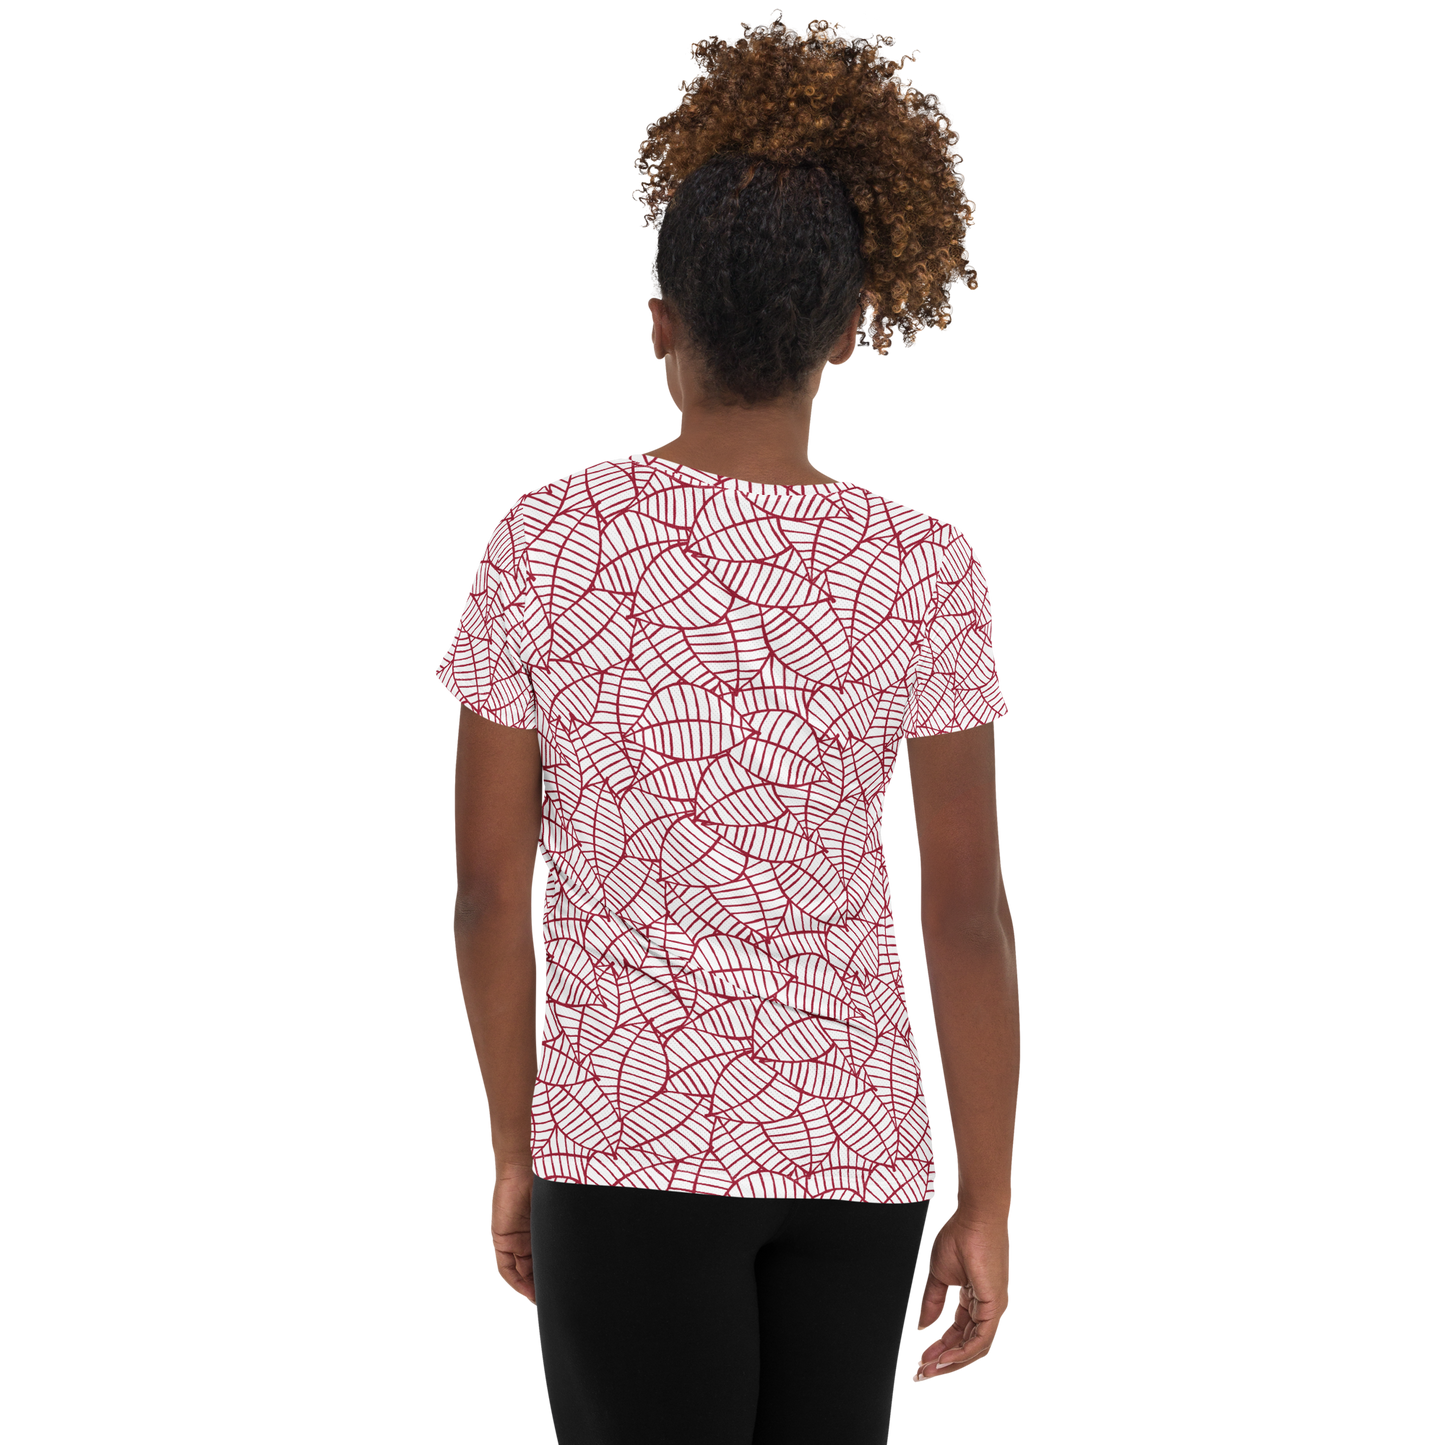 Colorful Fall Leaves | Seamless Patterns | All-Over Print Women's Athletic T-Shirt - #8